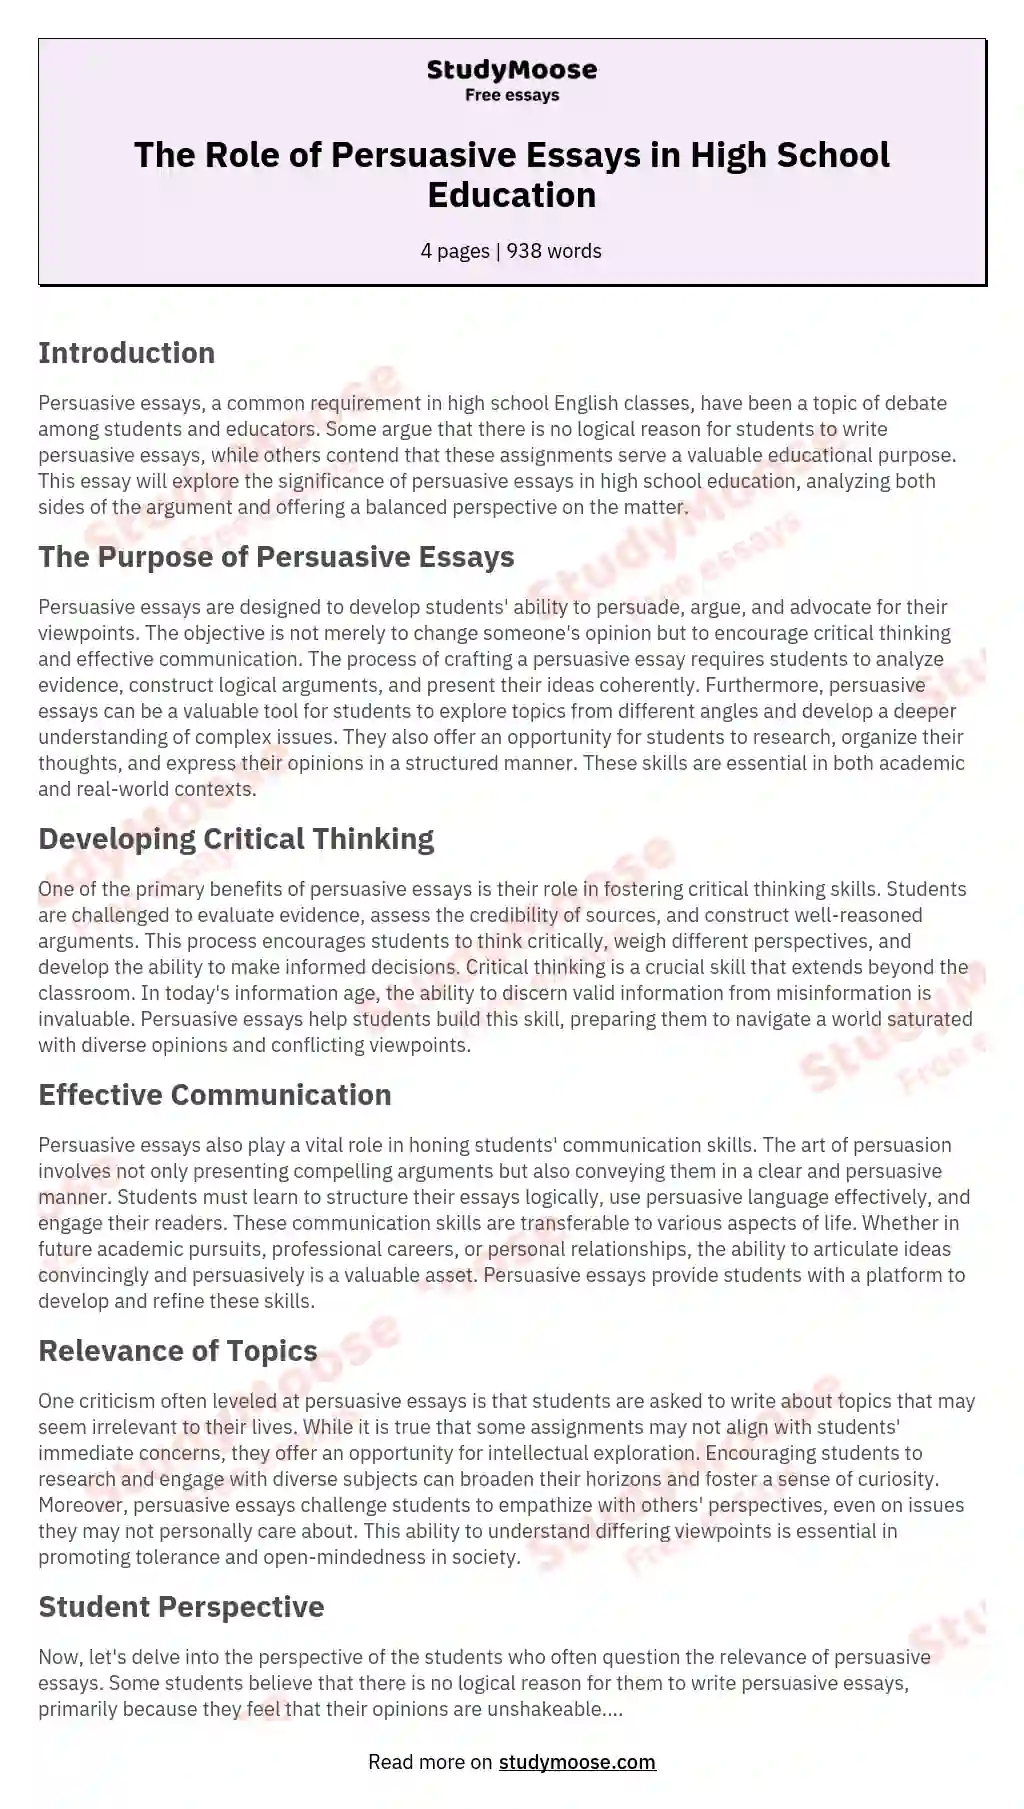 The Role of Persuasive Essays in High School Education essay